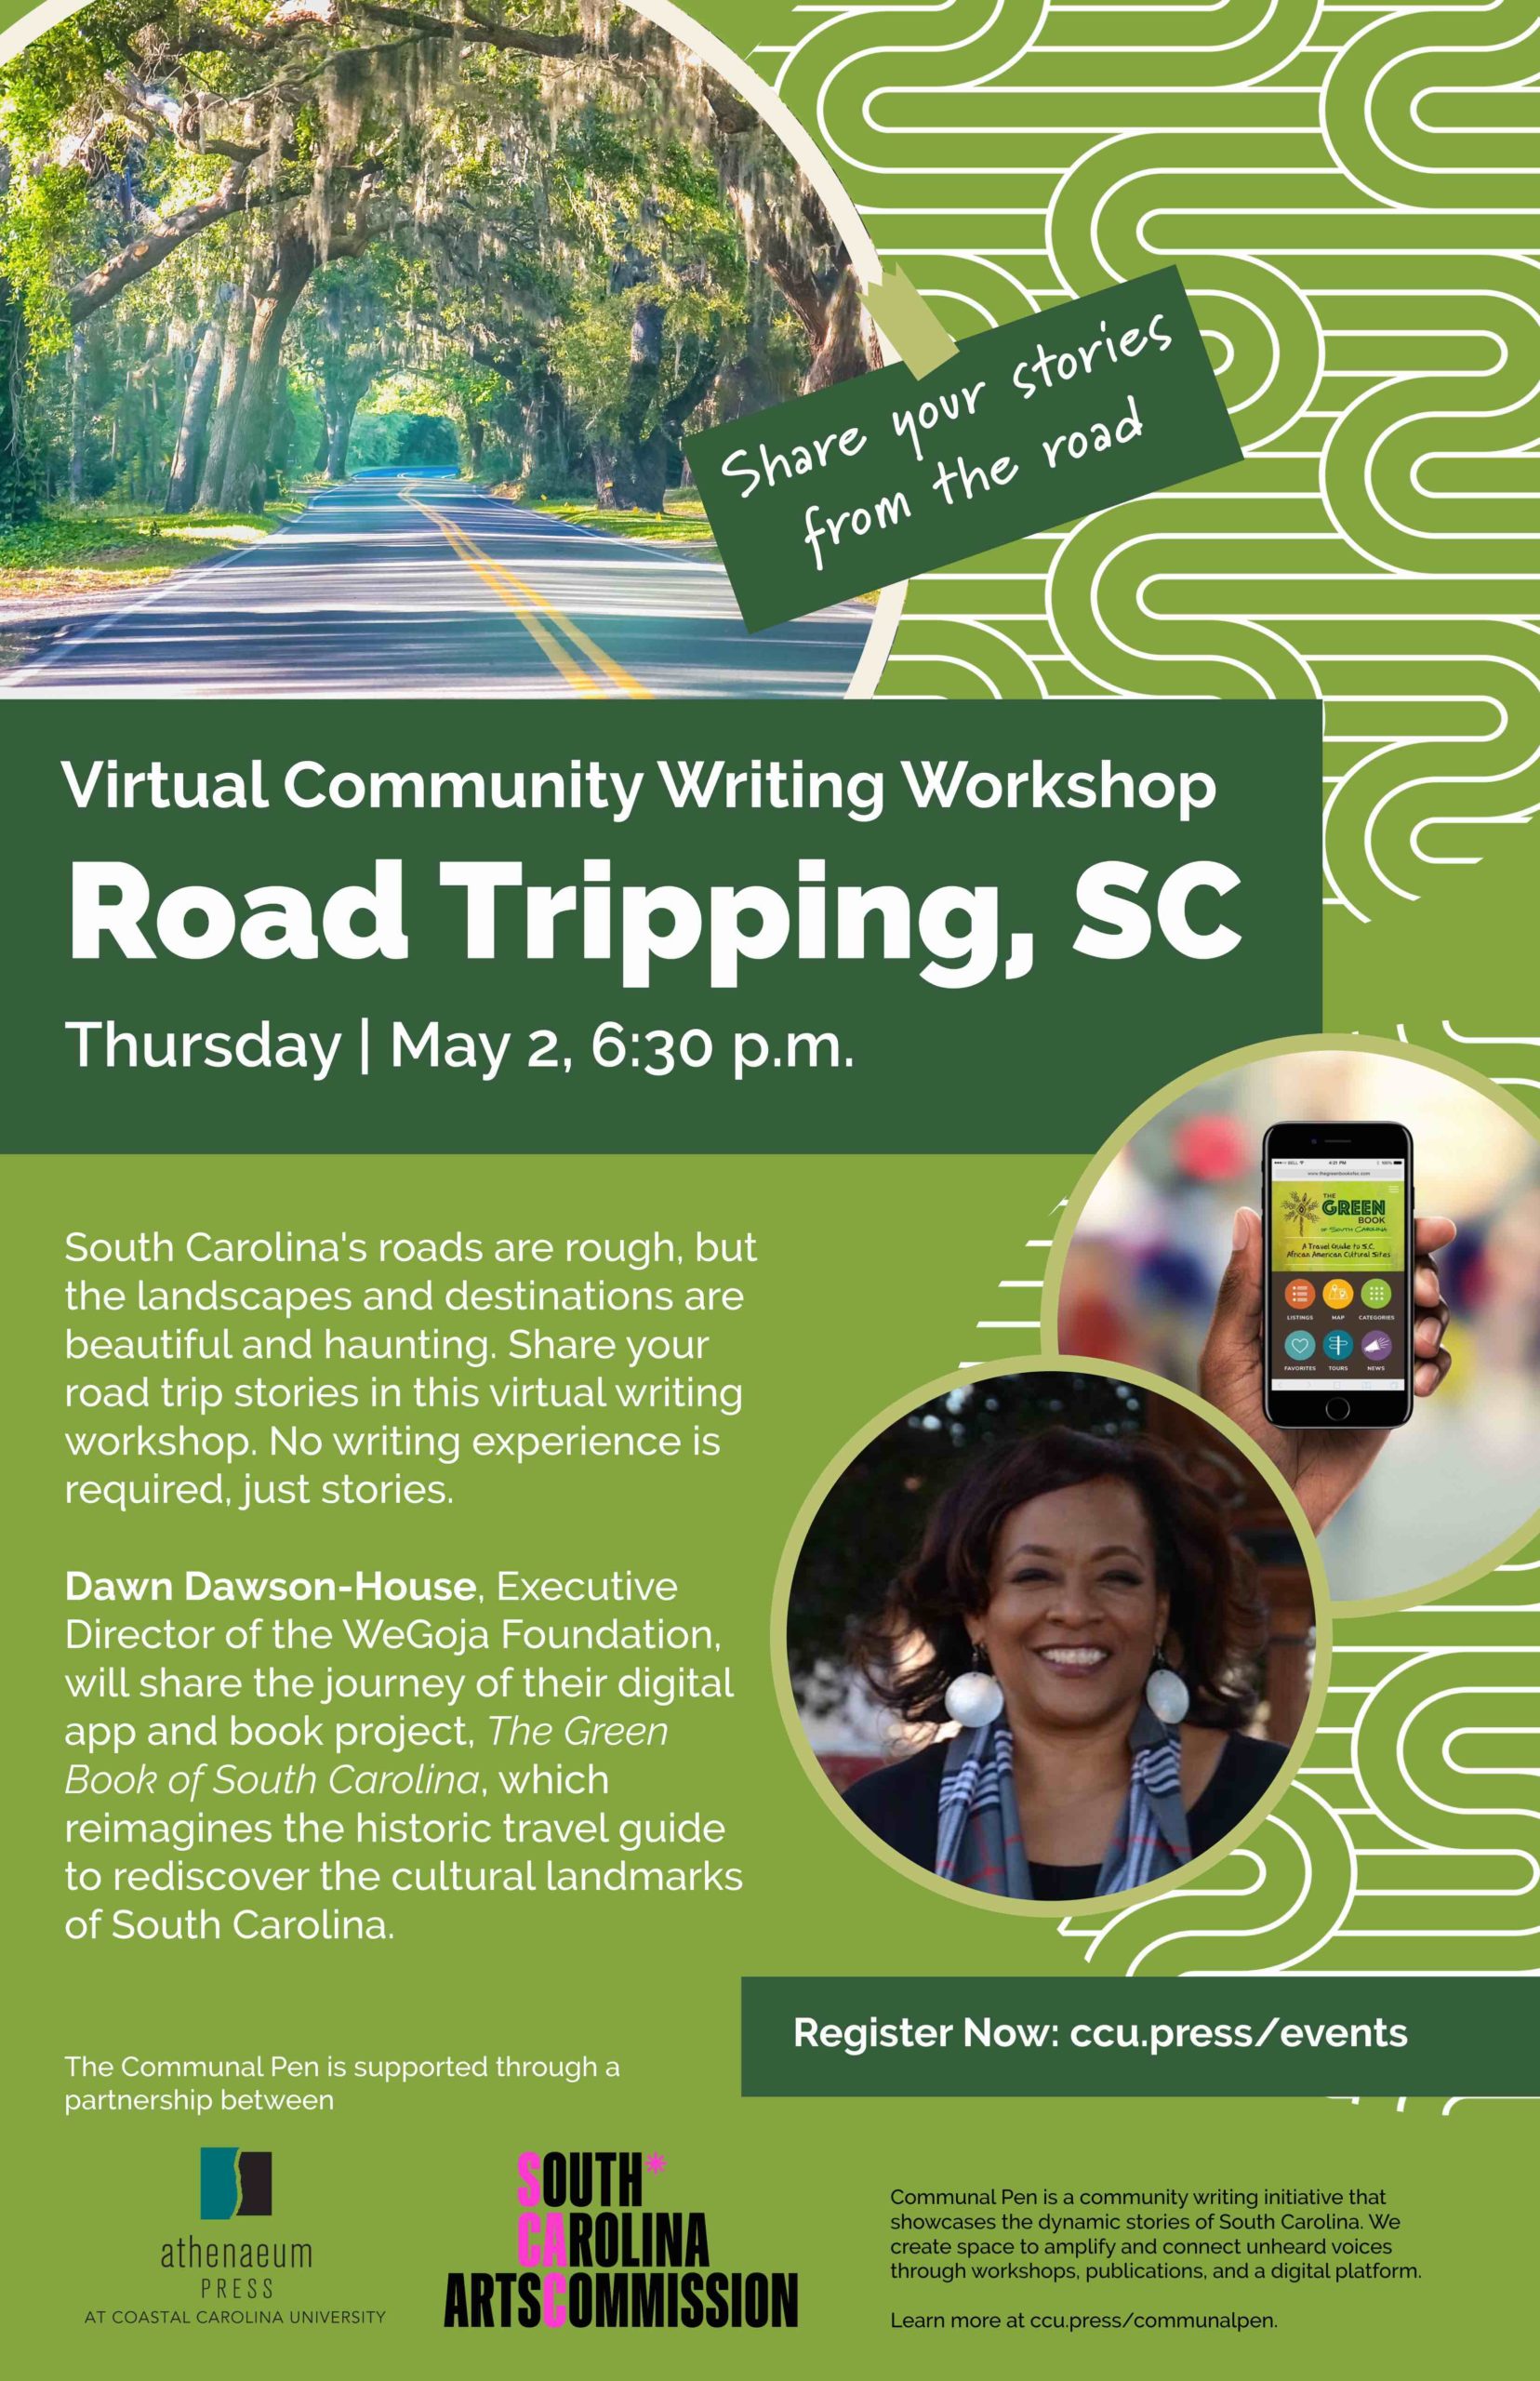 South Carolina's roads are rough, but the landscapes and destinations are beautiful and haunting. Share your road trip stories in this virtual writing workshop. No writing experience is required, just stories. Dawn Dawson-House, Executive Director of the WeGoja Foundation, will share the journey of their digital app and book project, The Green Book of South Carolina, which reimagines the historic travel guide to rediscover the cultural landmarks of South Carolina.